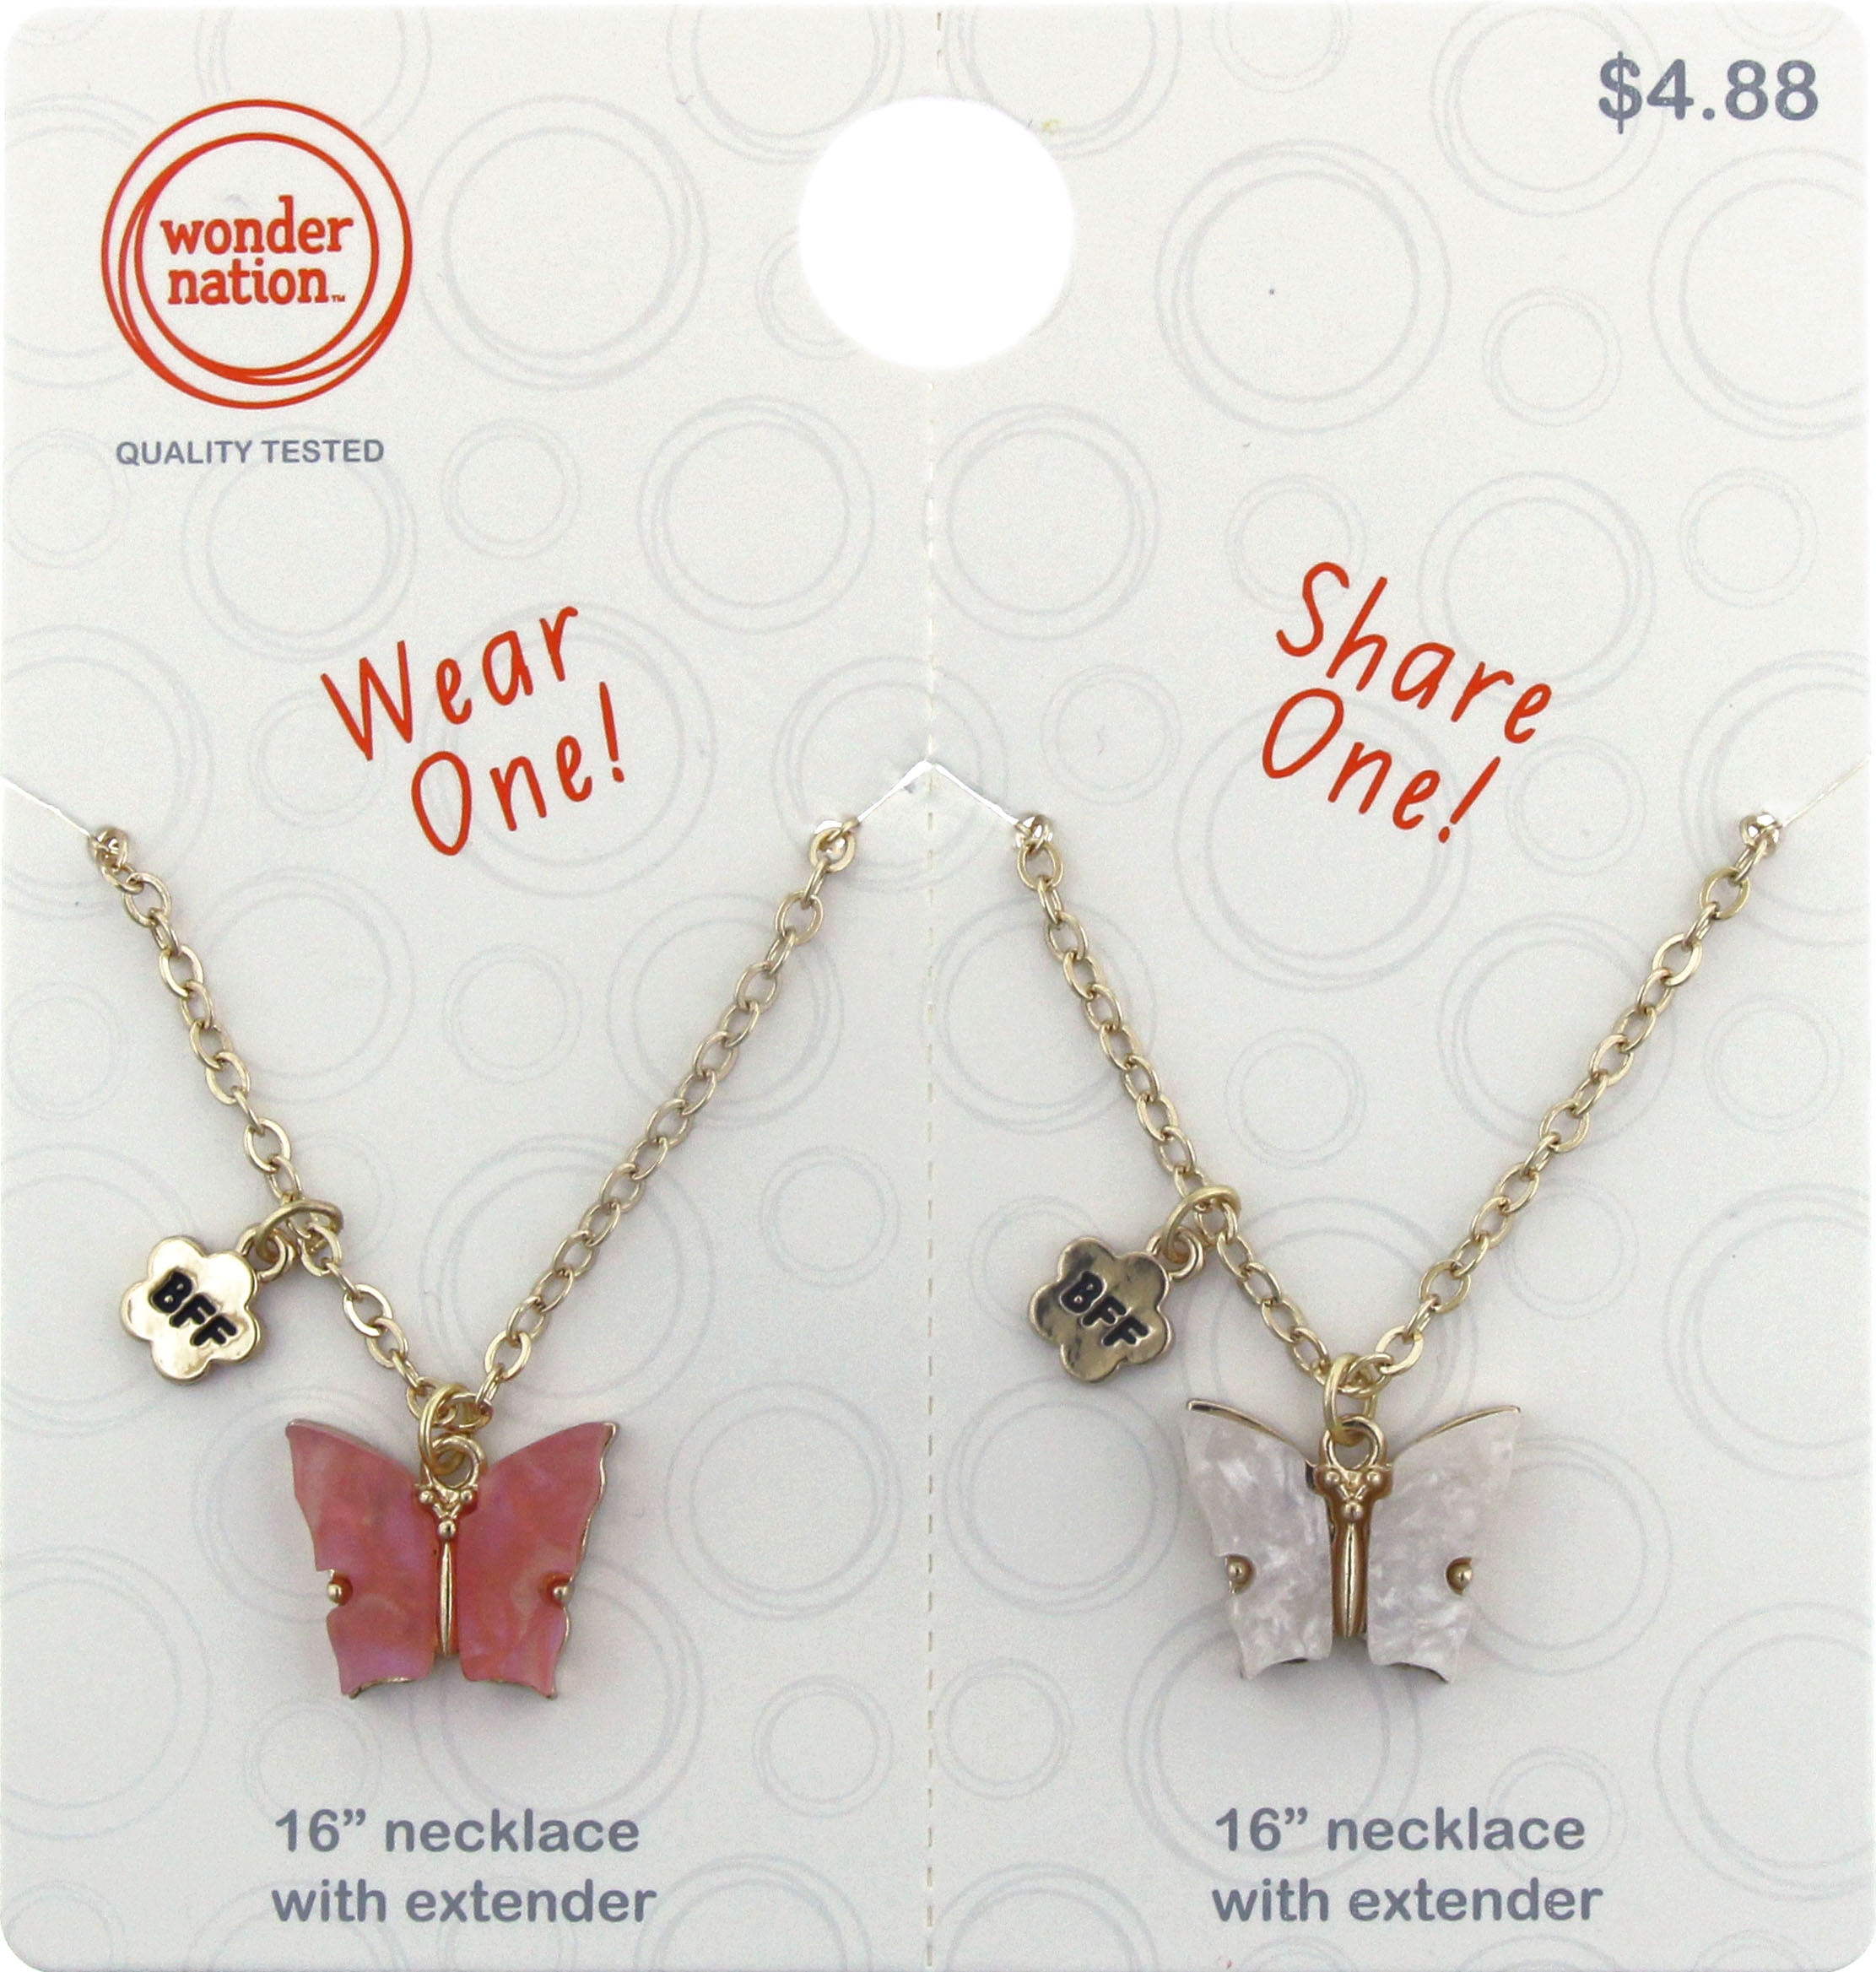 Wonder Nation Kids Butterfly BFF Wear One Share One Necklace Set 2 Pack Gold 95407bbe 9d40 430d 88cf 6179fe9662c0.22882cdb12585731901bb848c67951e3